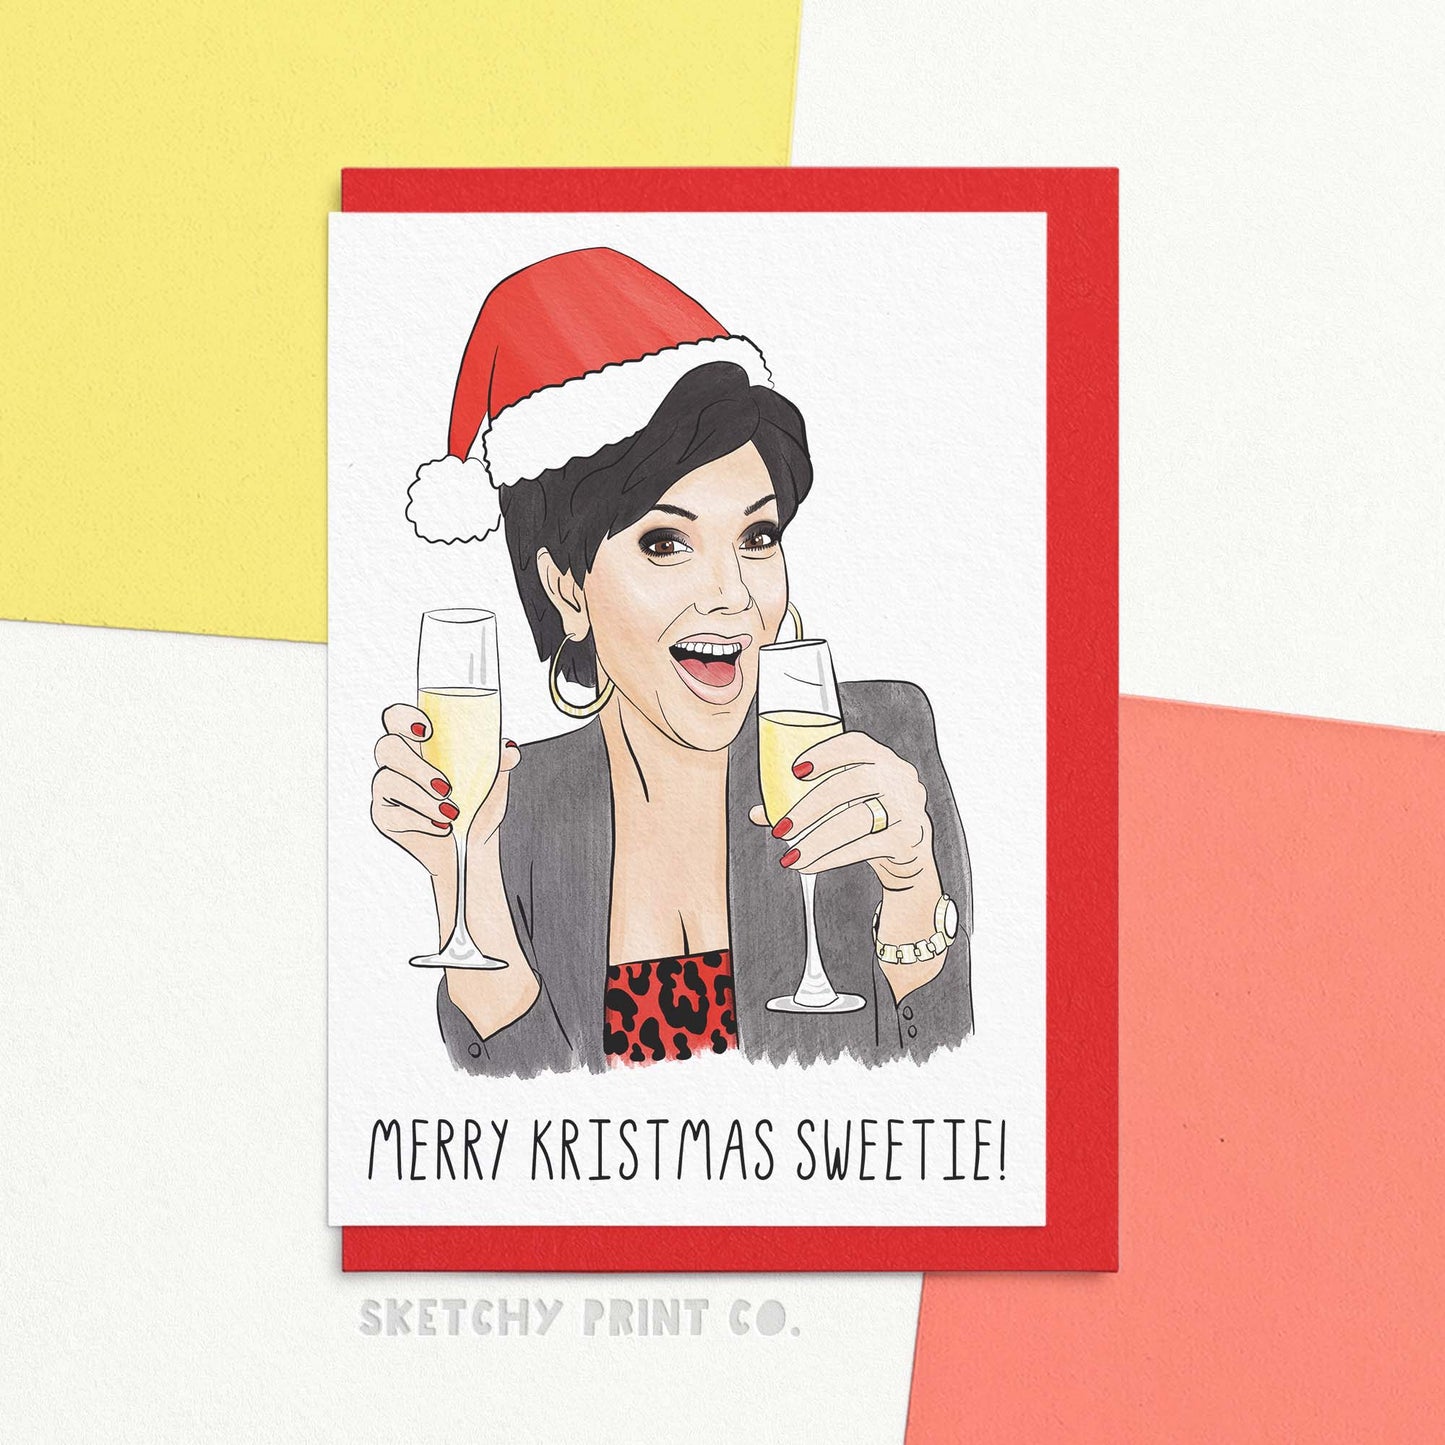 Merry Christmas wishes Christmas card reading merry Christmas sweetie! with an artists interpretation of a reality tv star wearing a Christmas hat holding champagne Would you stop taking pictures of yourself! We've made the best Christmas card! Perfect for the reality TV fan in your life, raise a glass of champagne and send funny Christmas wishes in this stylishly quirky greeting card. We're not crazy, we're chillin', Cheers!  